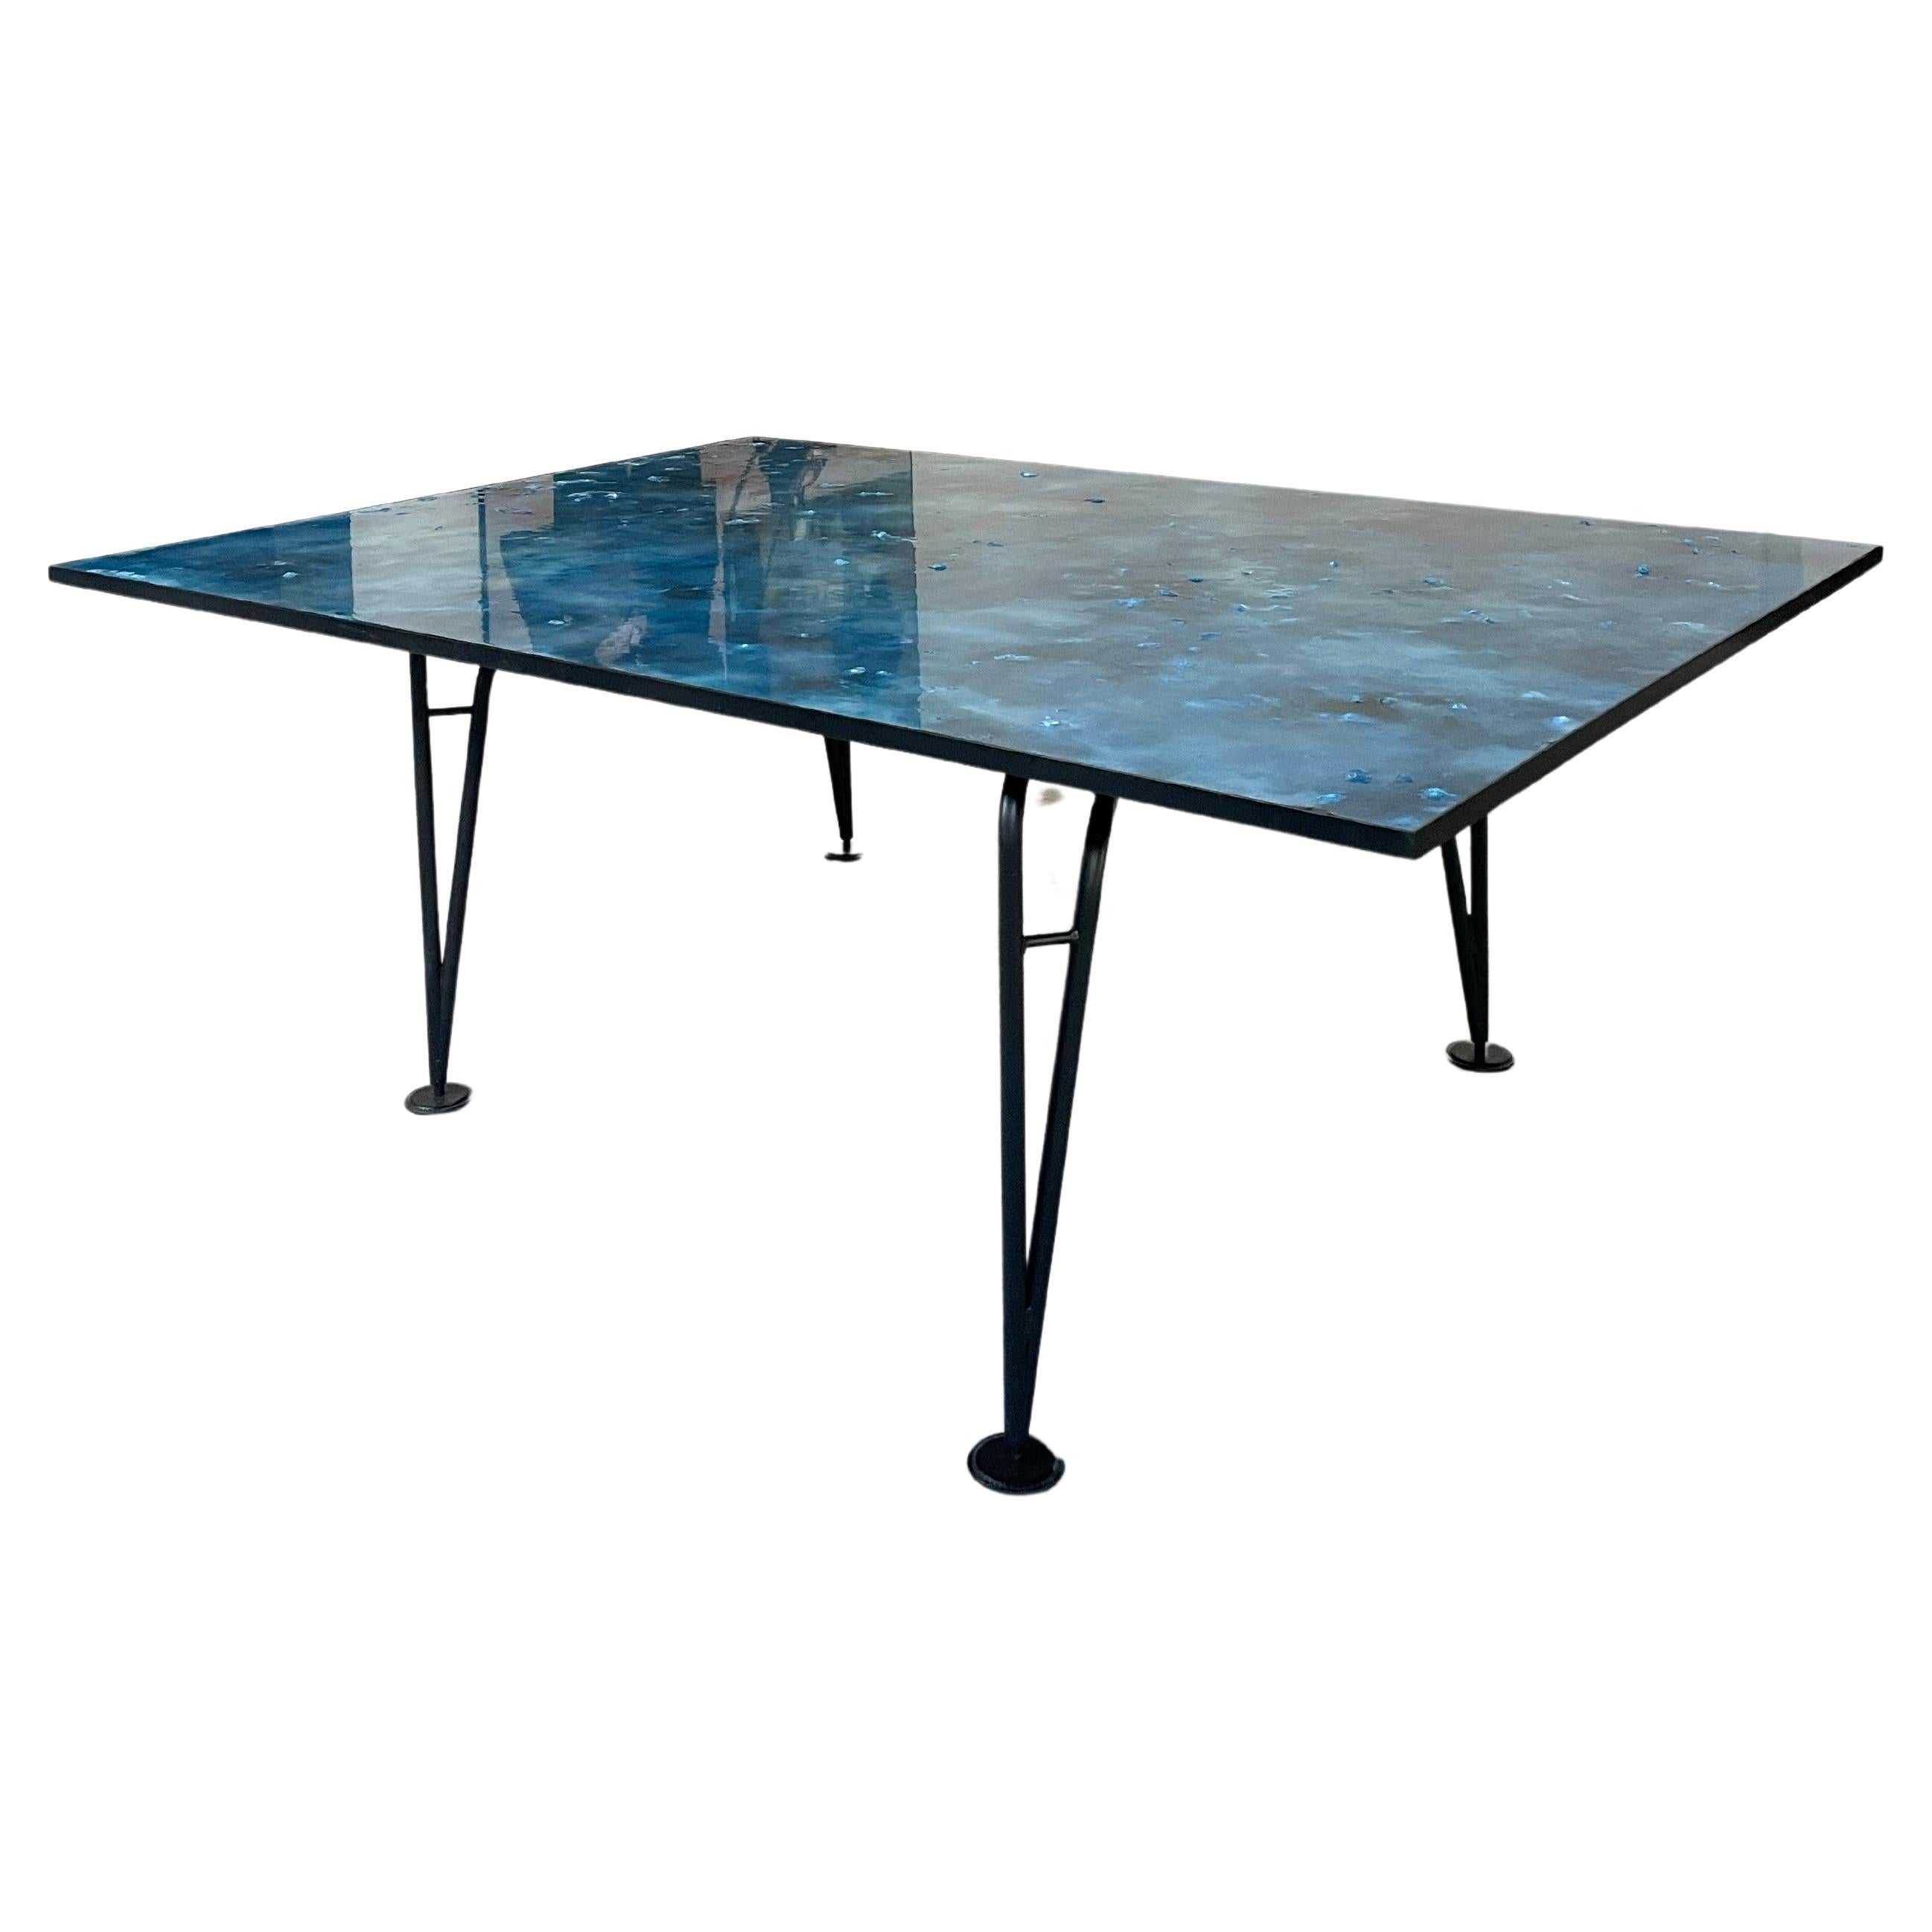 Asymmetrical - Collectible Design Table with Metal Legs and Resin Blue Top